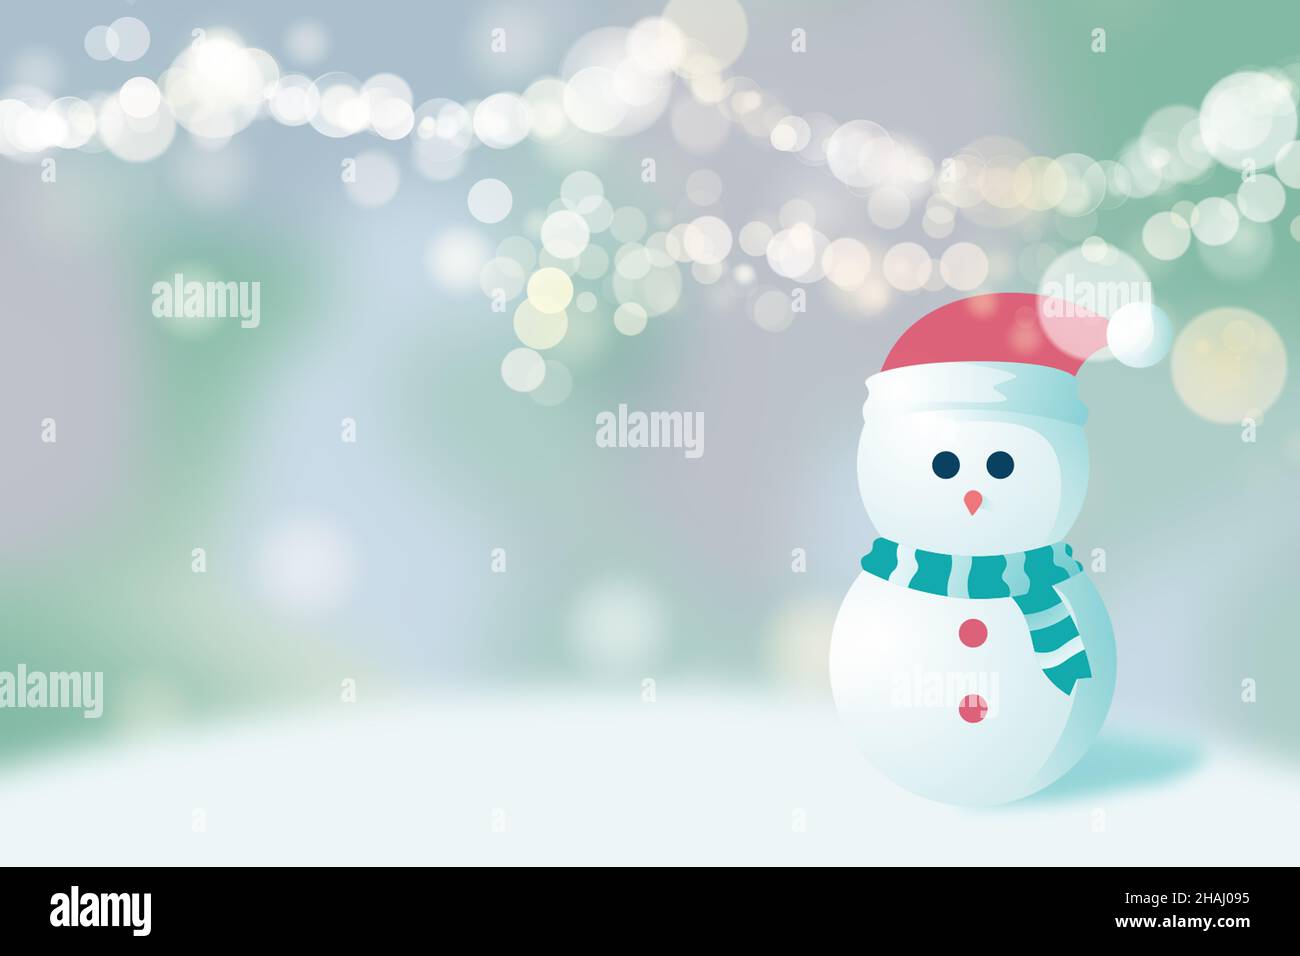 Illustration of a snowman with hat and scarf. The background shows a blurred string of lights with lots of bokeh. There is copy space in the foregroun Stock Photo